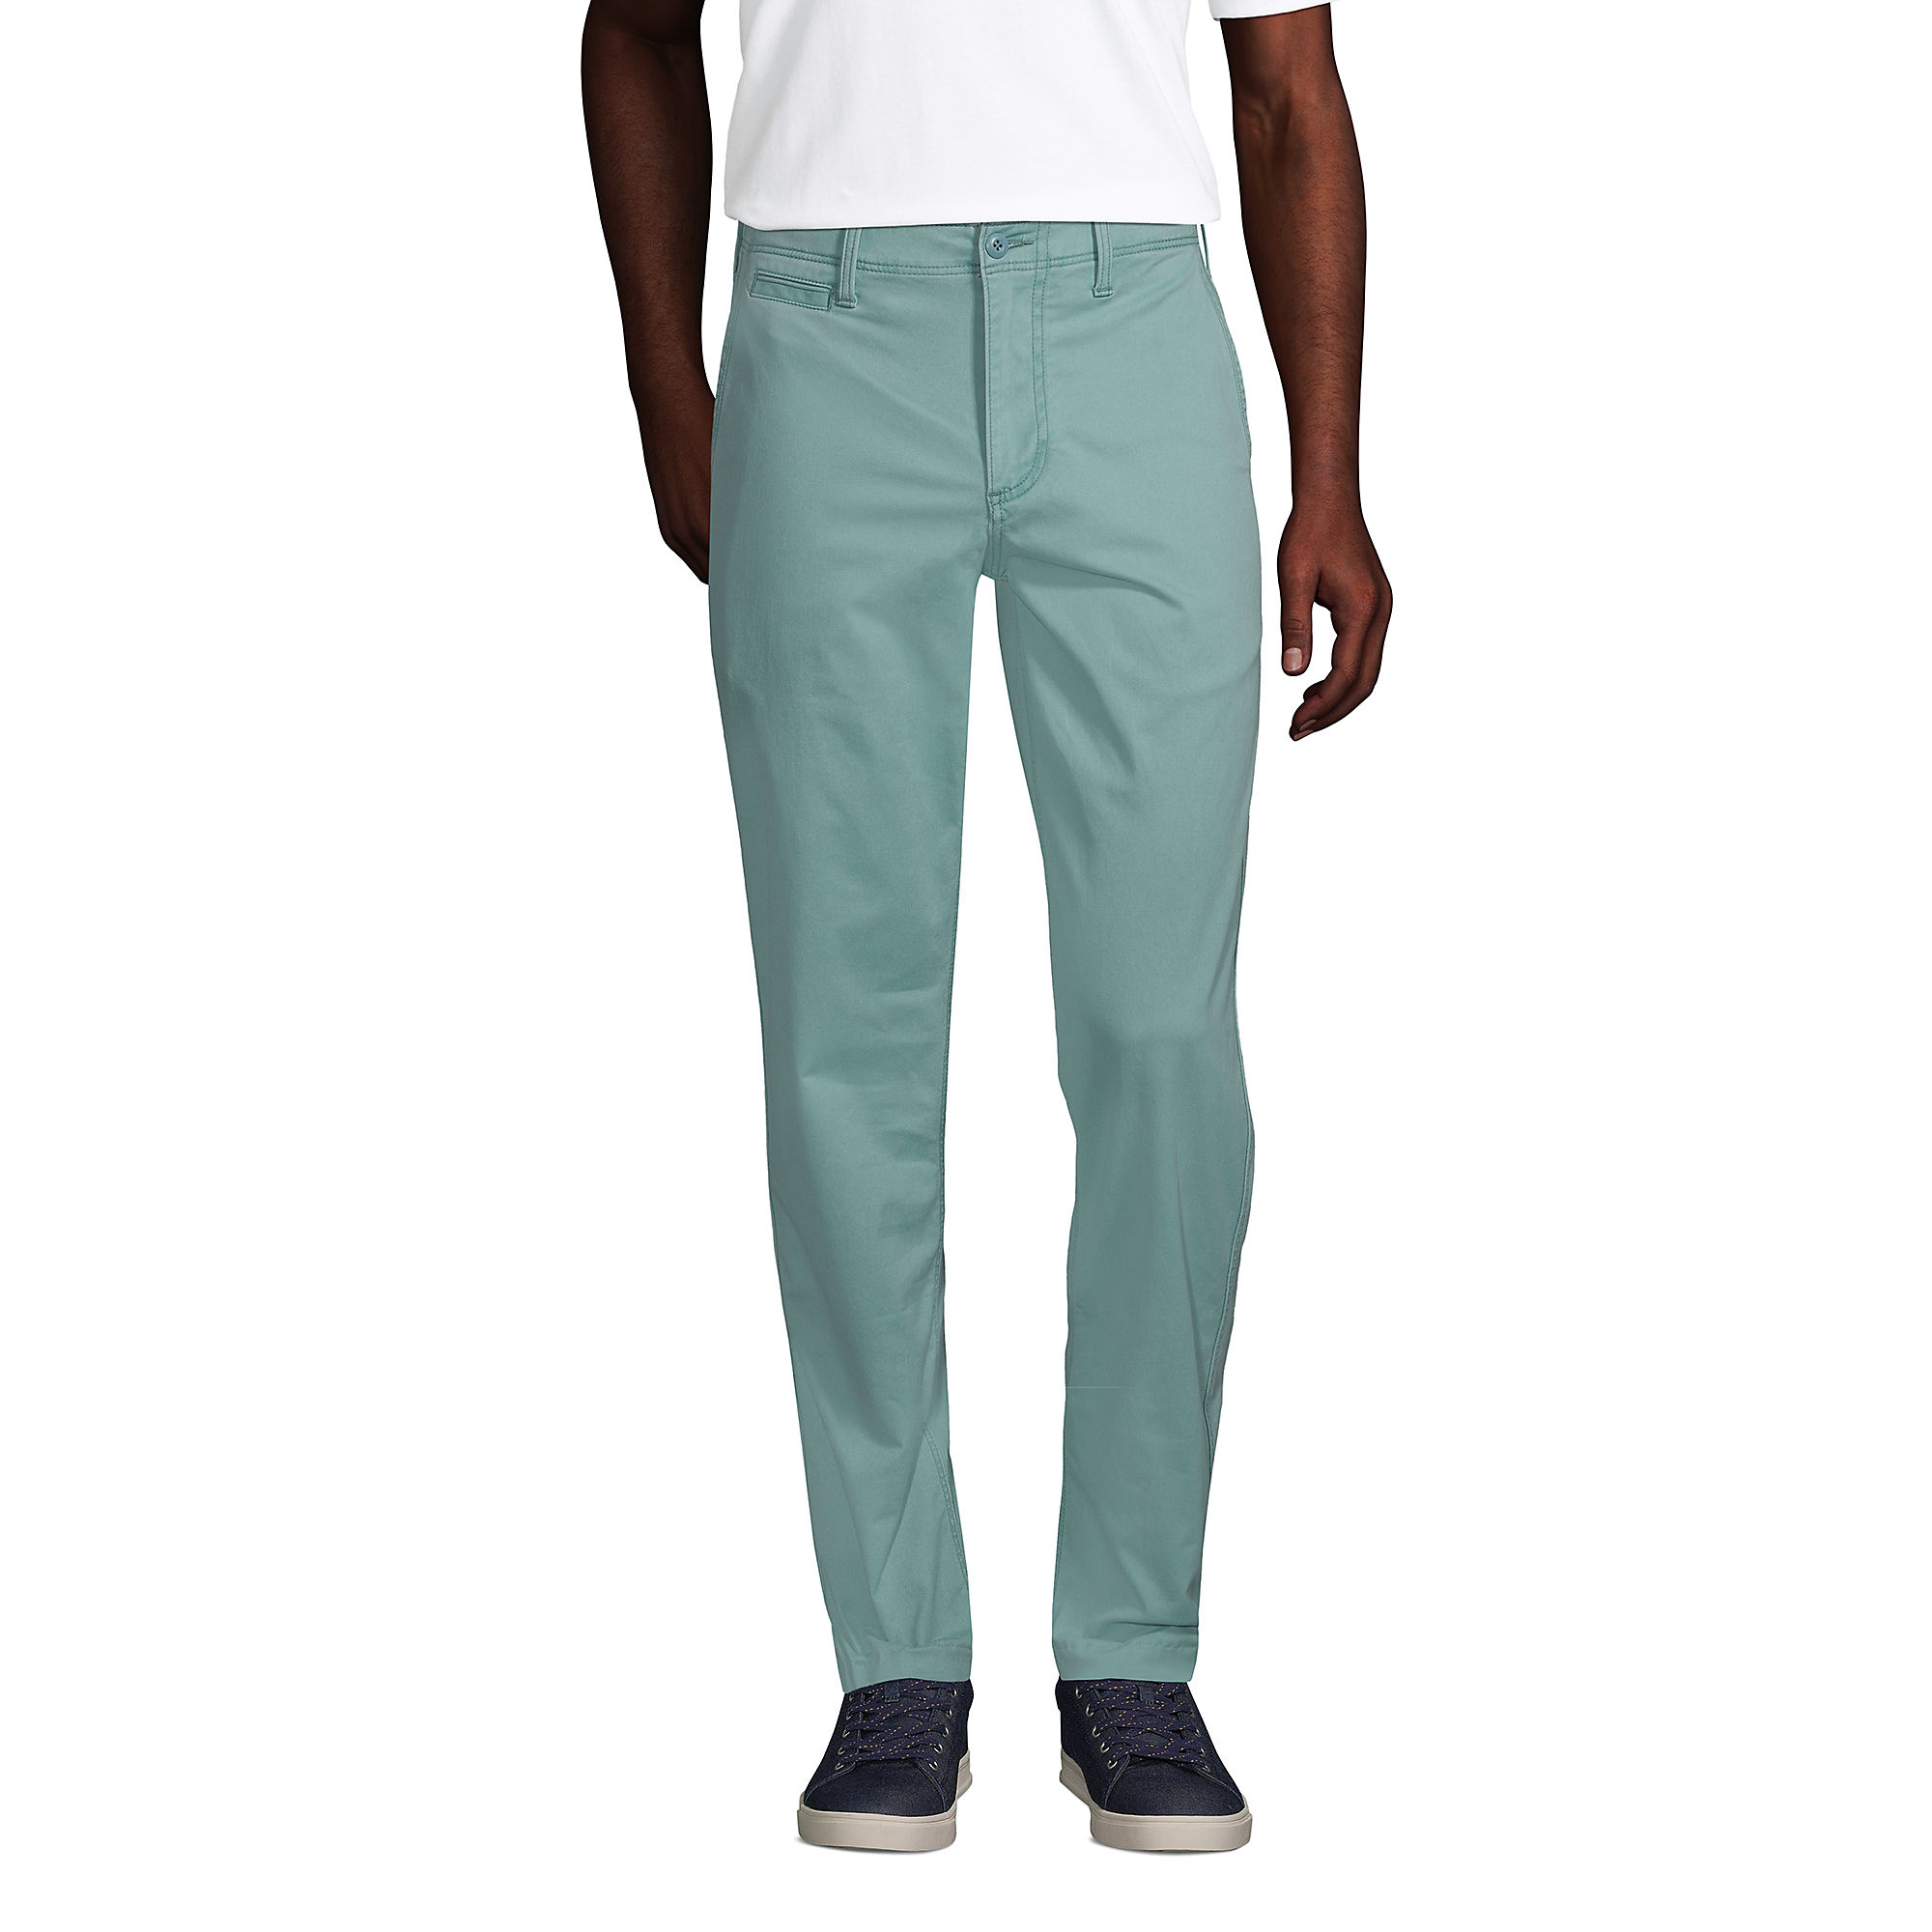 Lands End Men's Traditional Fit Sea Washed Casual Chino Pants (3 colors)